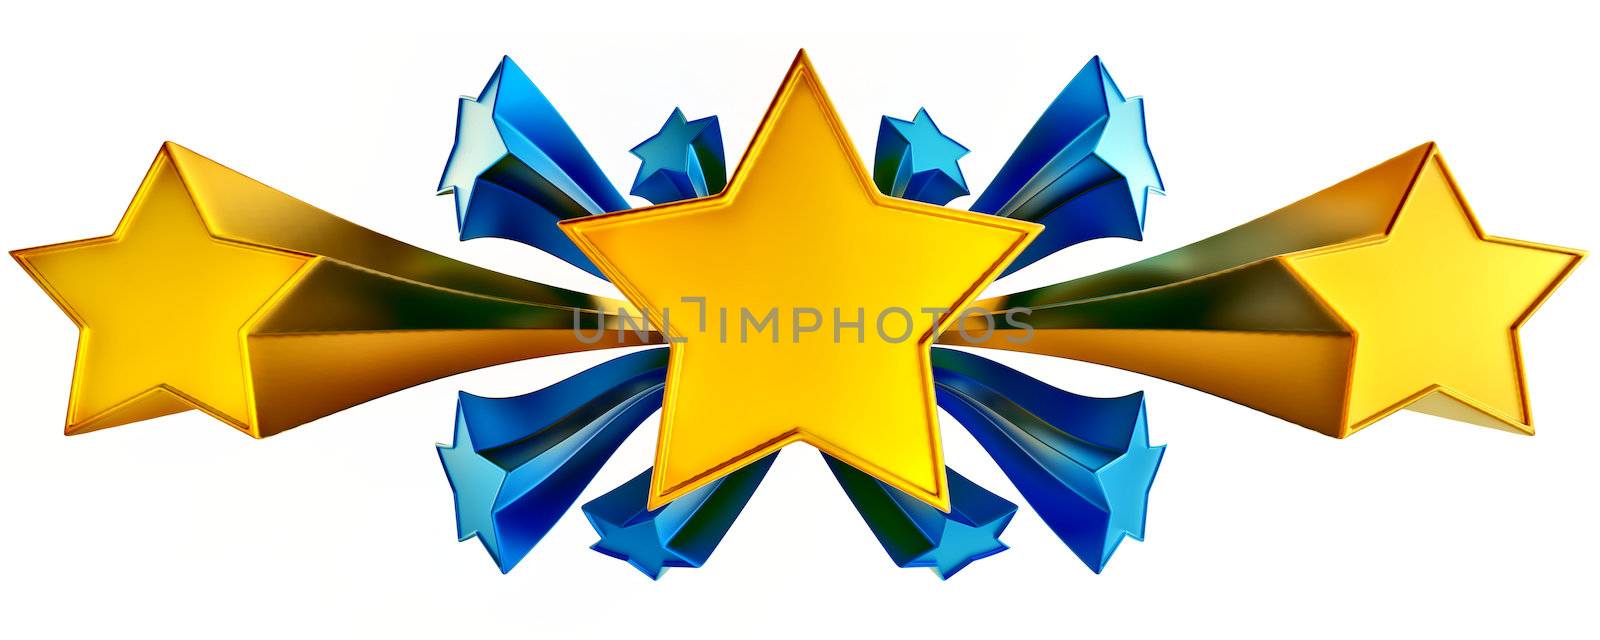 a set of eleven shiny gold and blue stars in motion for advertise